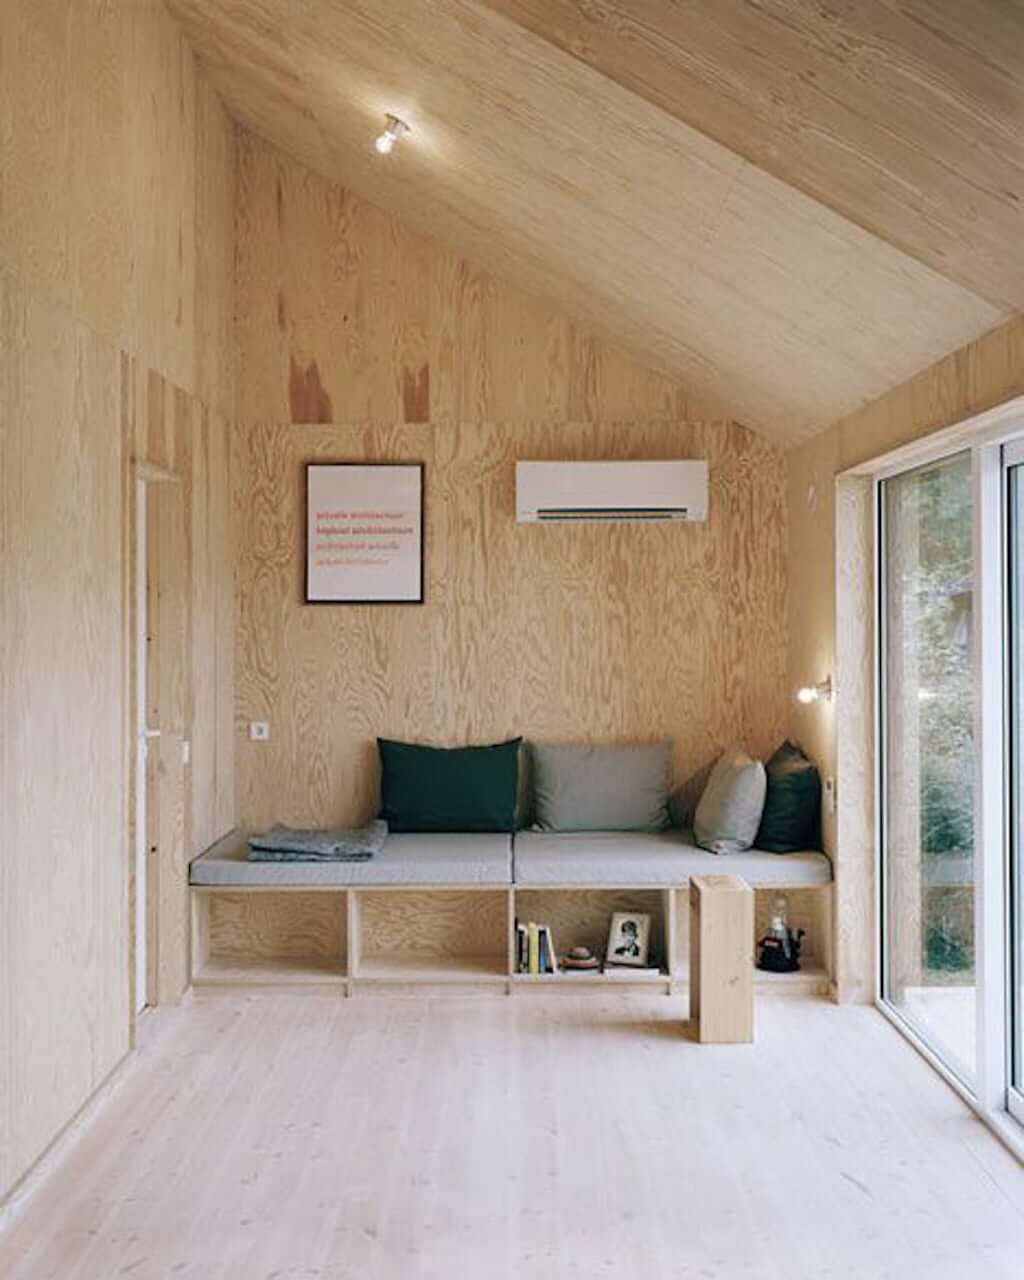 modern interior with wood walls and ceilings